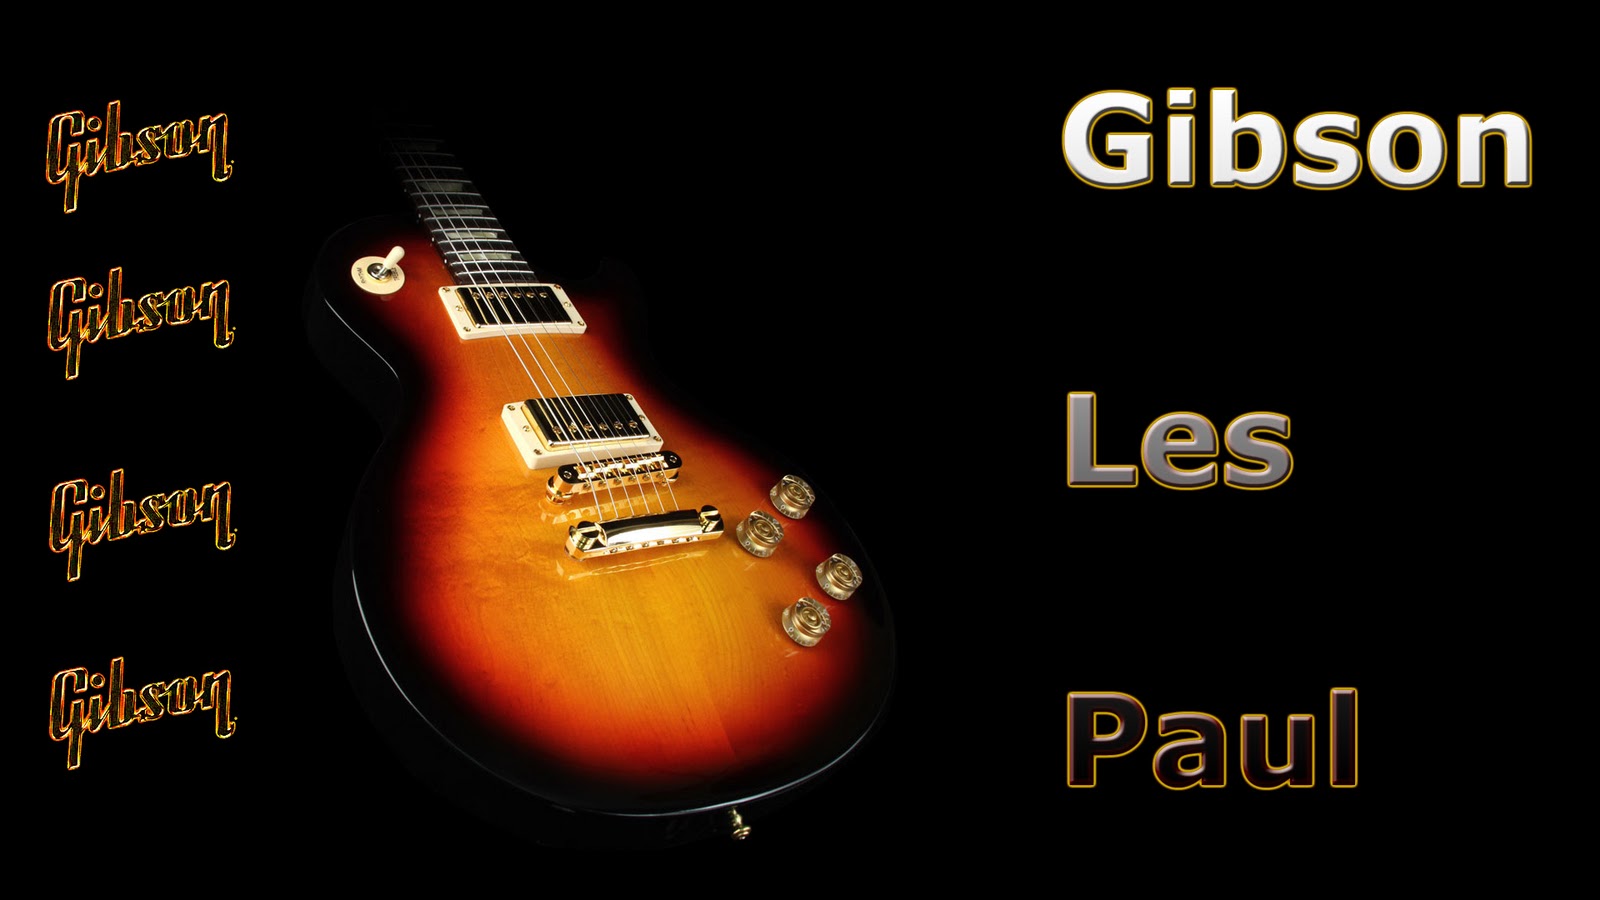 Gibson Guitar Wallpapers 8595 Hd Wallpapers in Music   Imagescicom